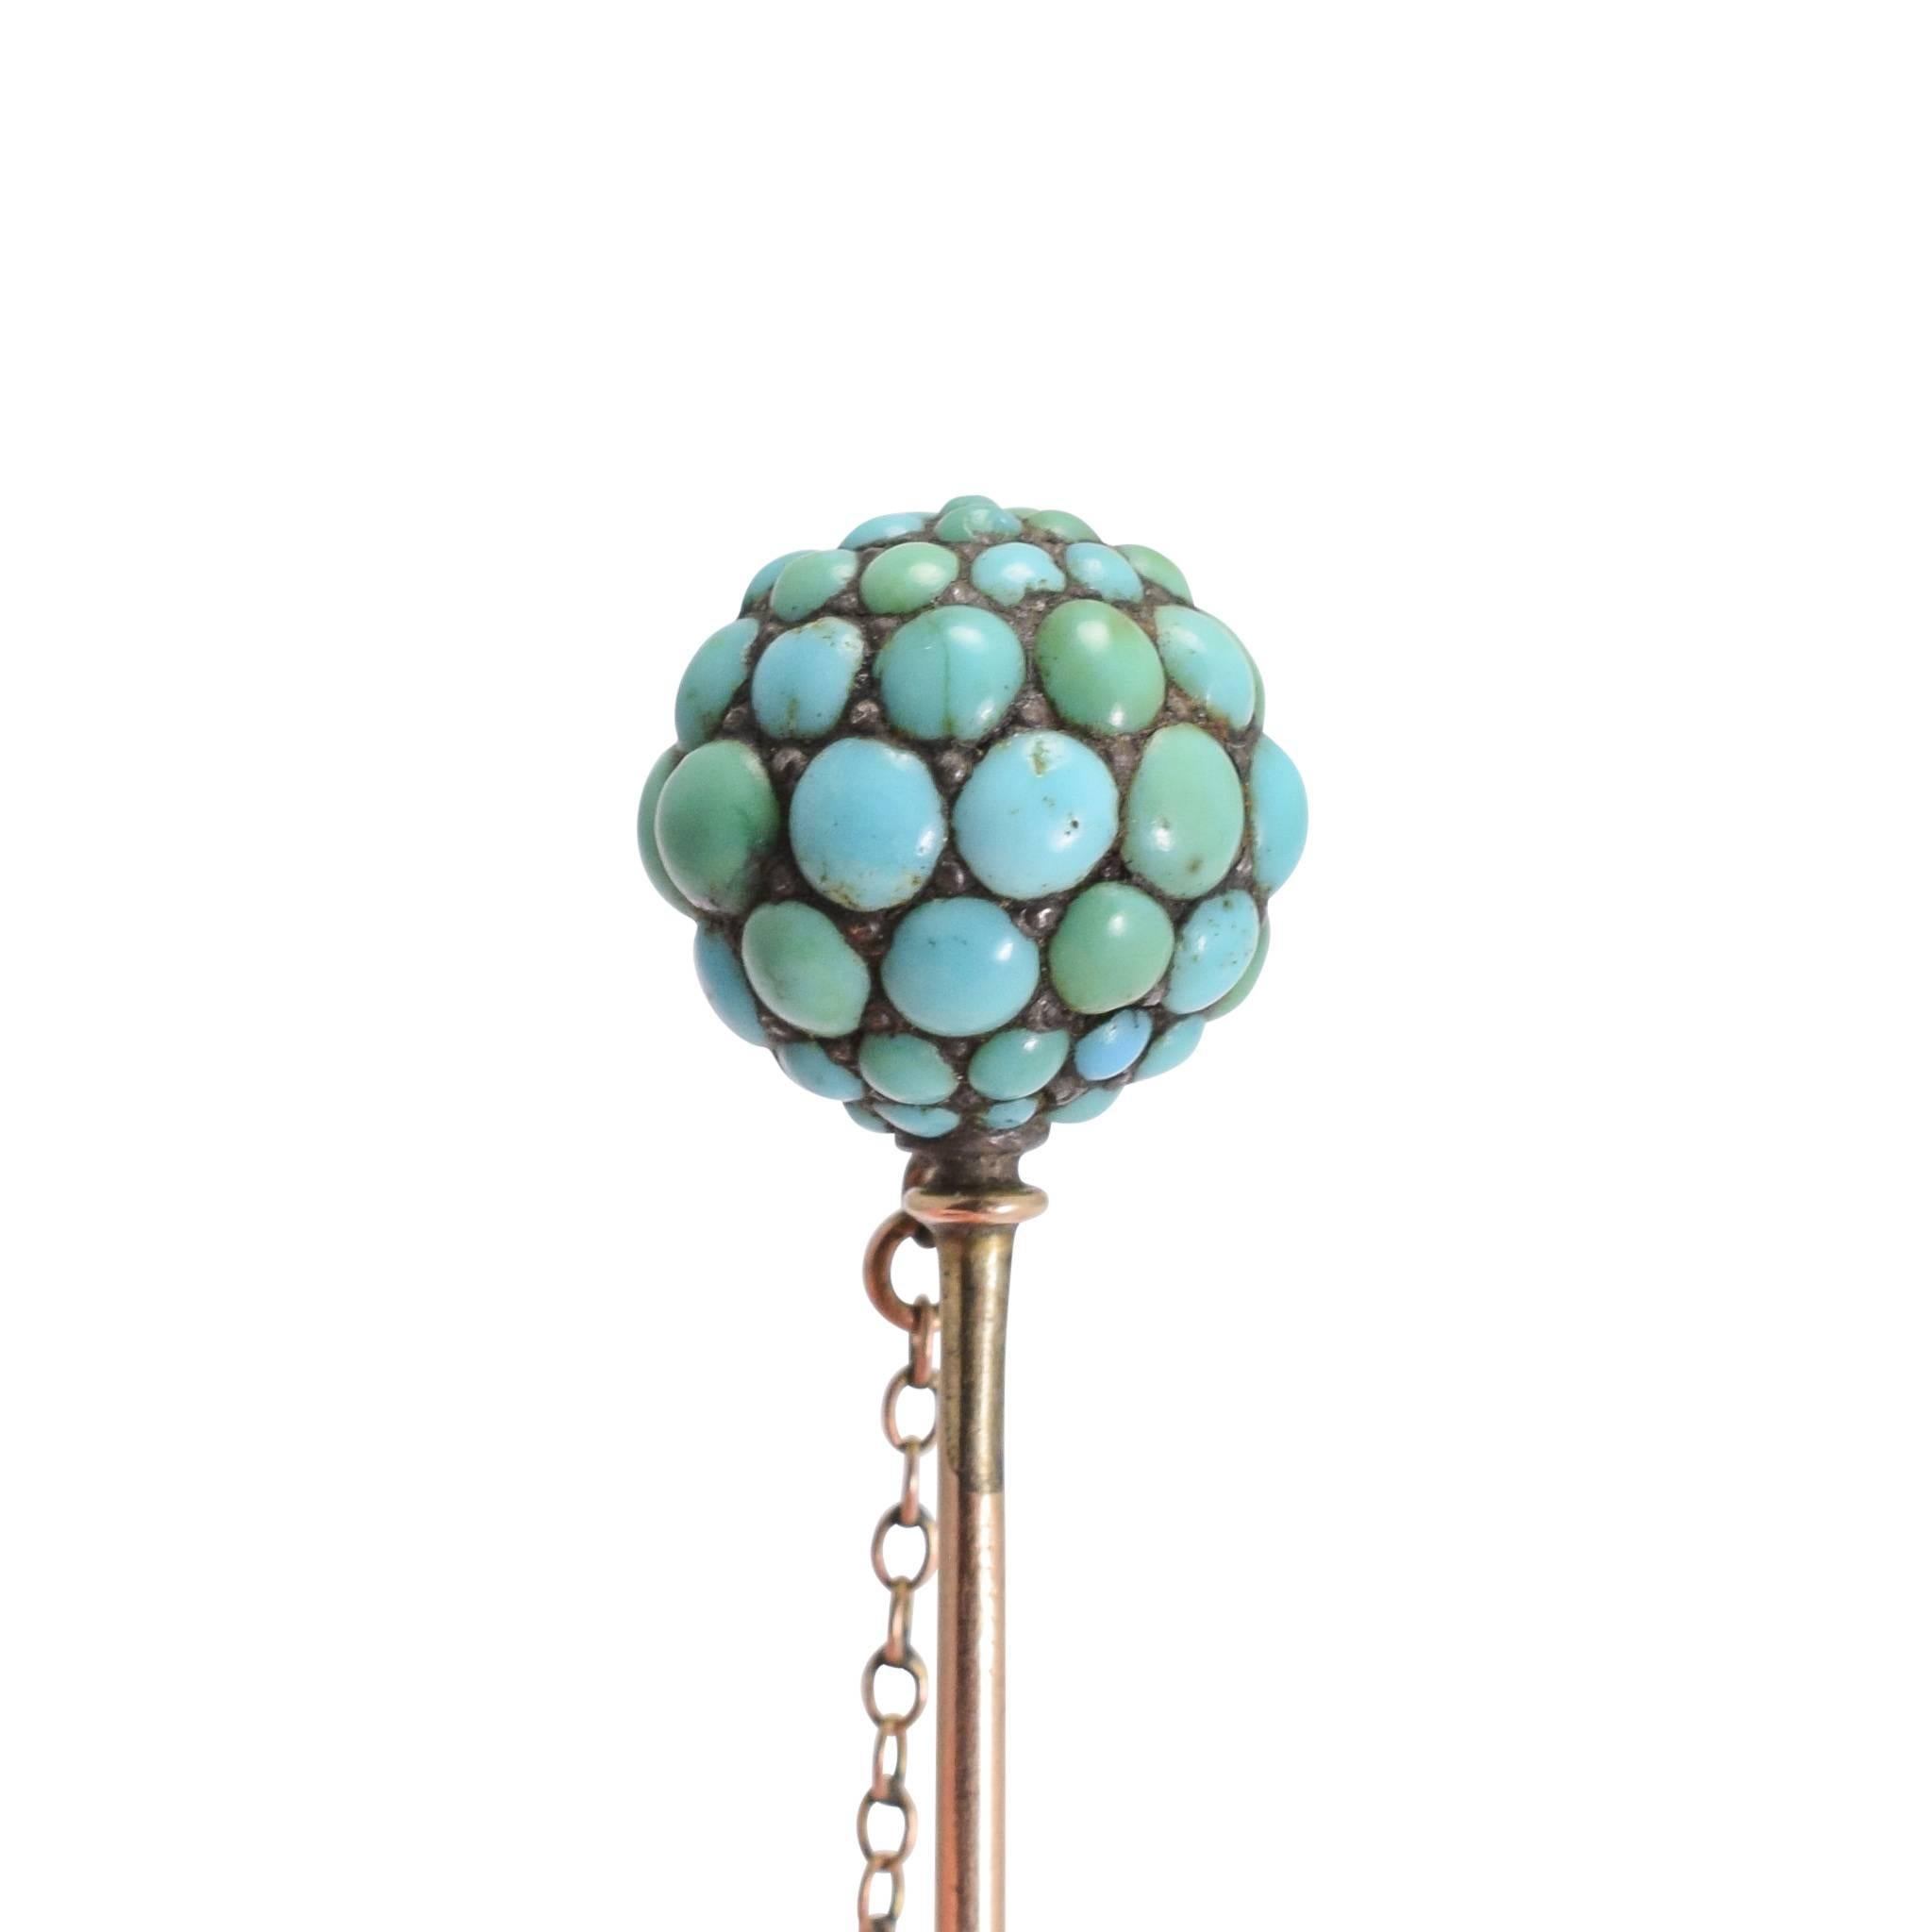 A cool, and sort of futuristic/alien looking, antique stick pin - the head is an orb set with graduated turquoise cabochons, each row getting smaller from the equator to the poles. The pin is 9k gold, and the stones set in silver that has oxidised